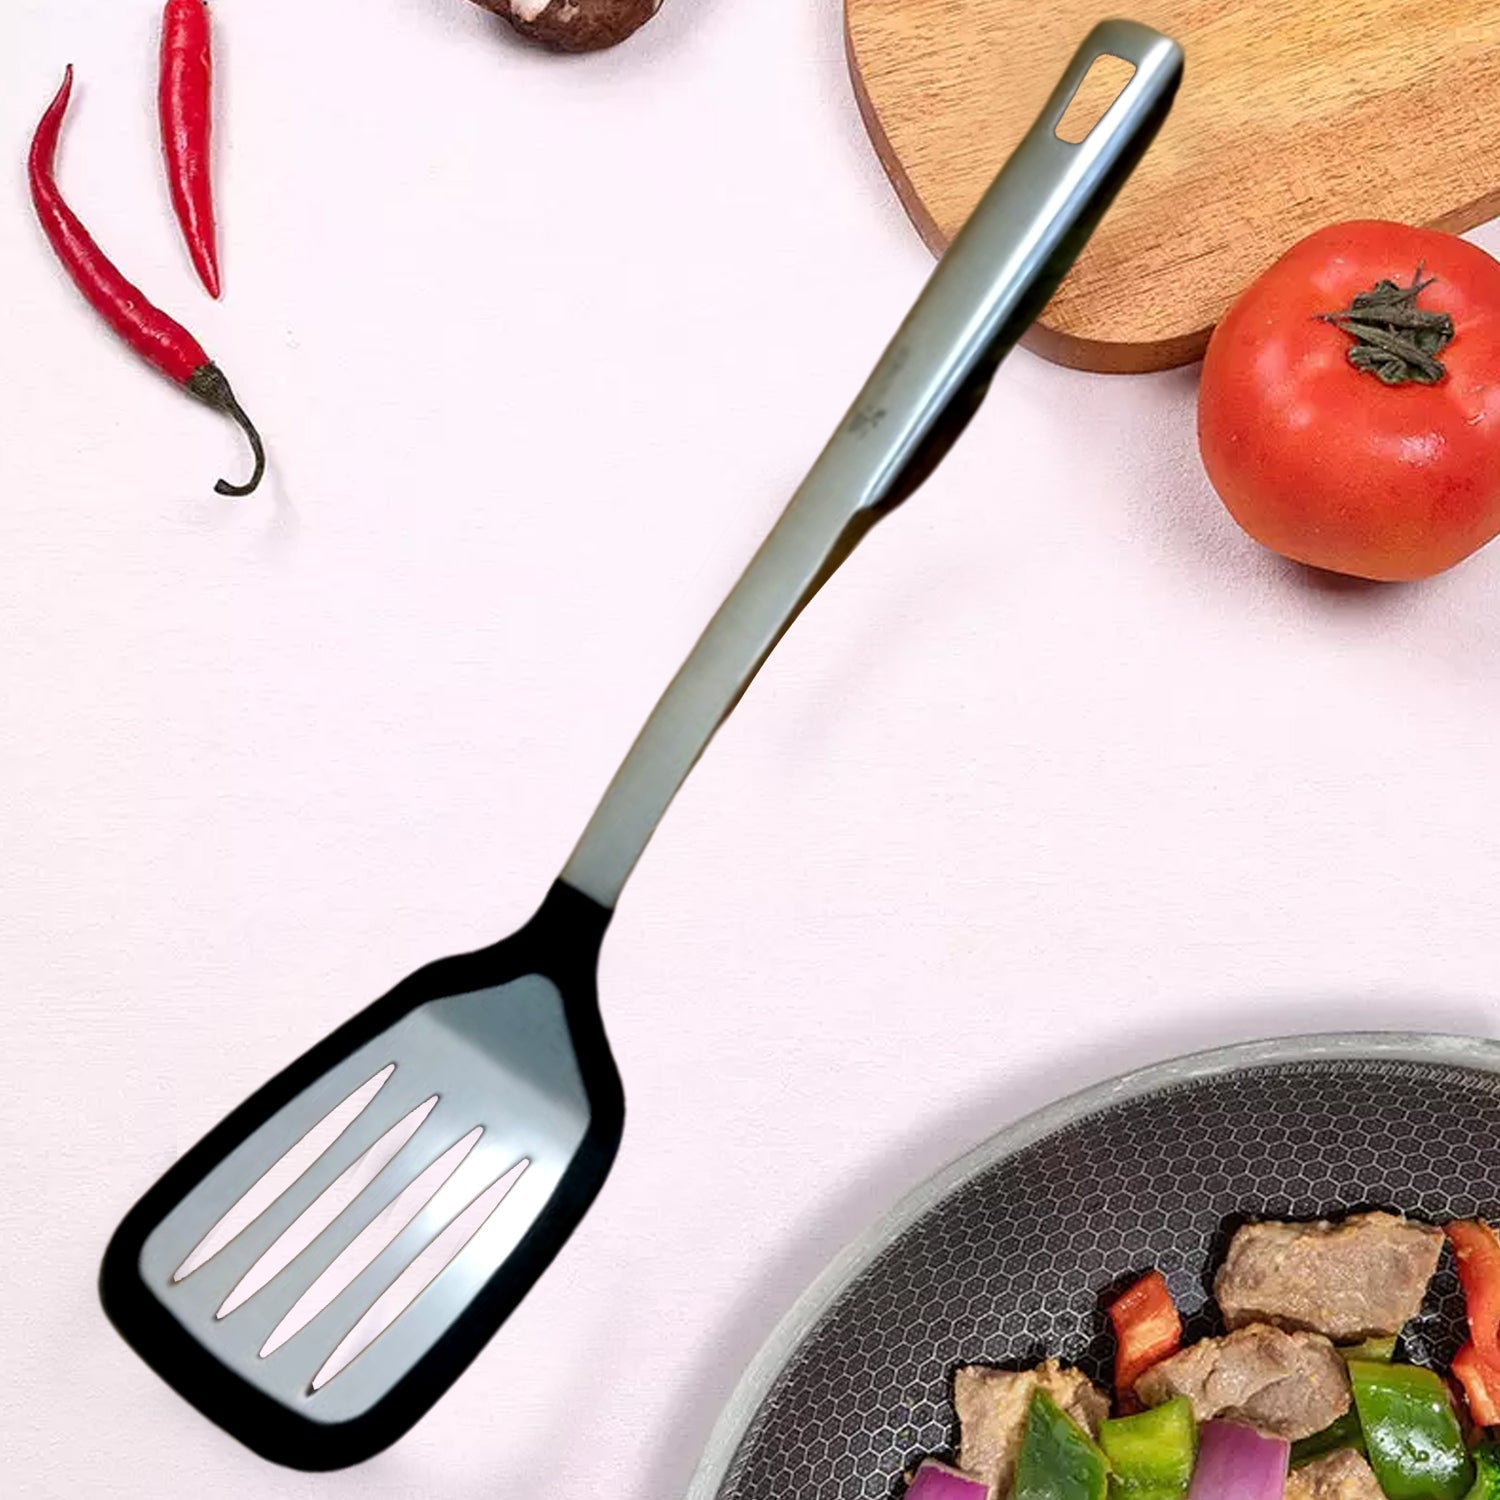 7108  Steel Turner Spatula For Cooking Use 38cm (1 pcs ) DeoDap